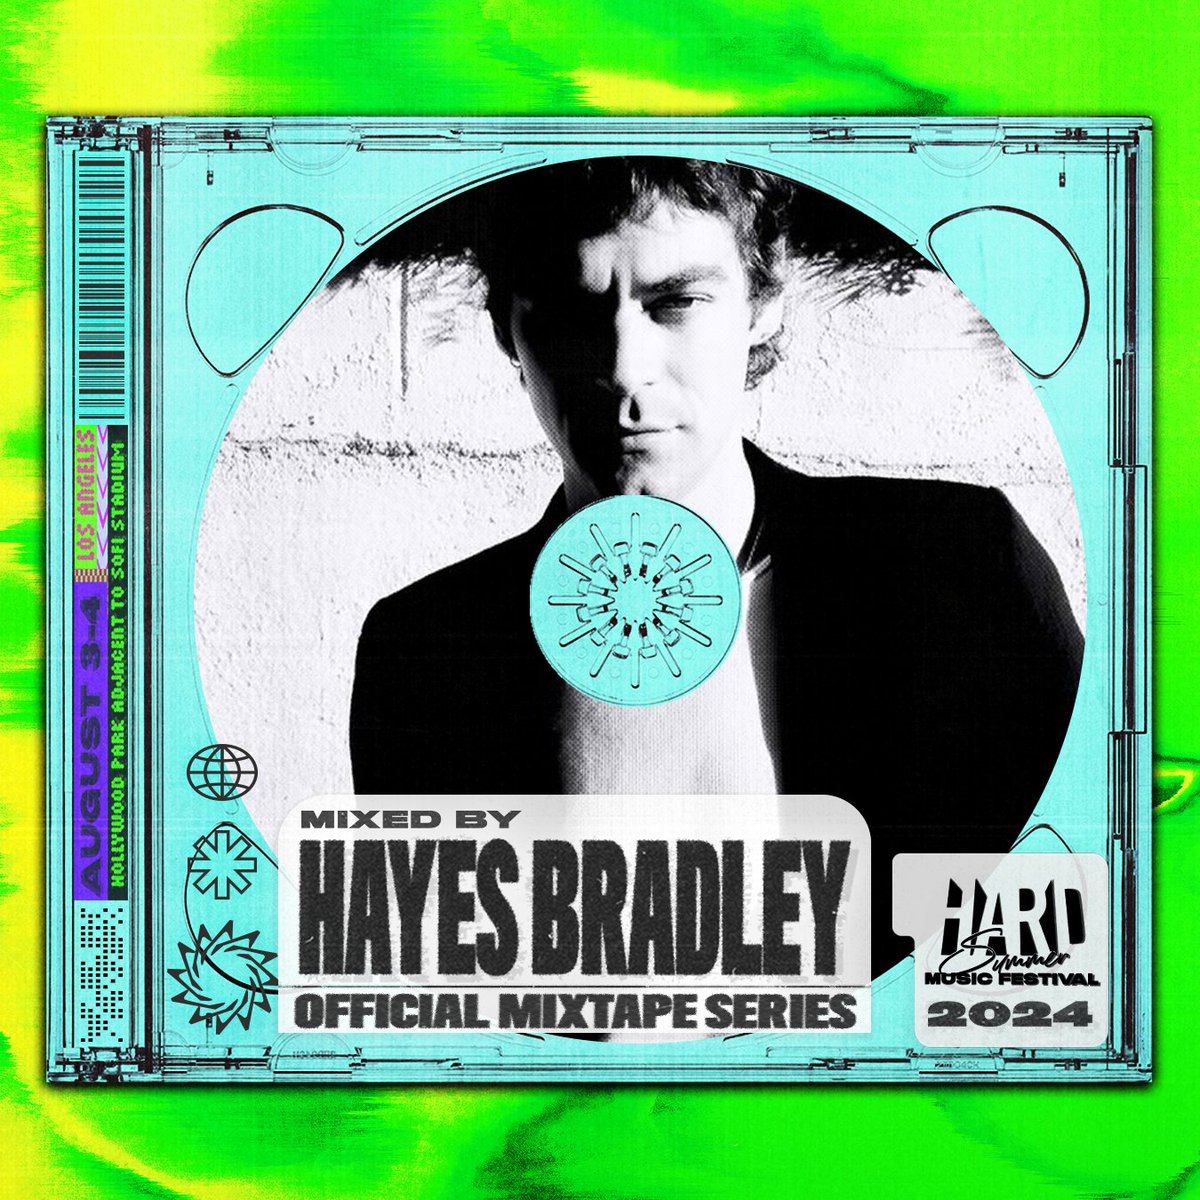 heyyy! time to bounce around to @hayesbradley_'s HSMF 2K24 mixtape! Tune in at hardfest.co/2k24-mixtapes